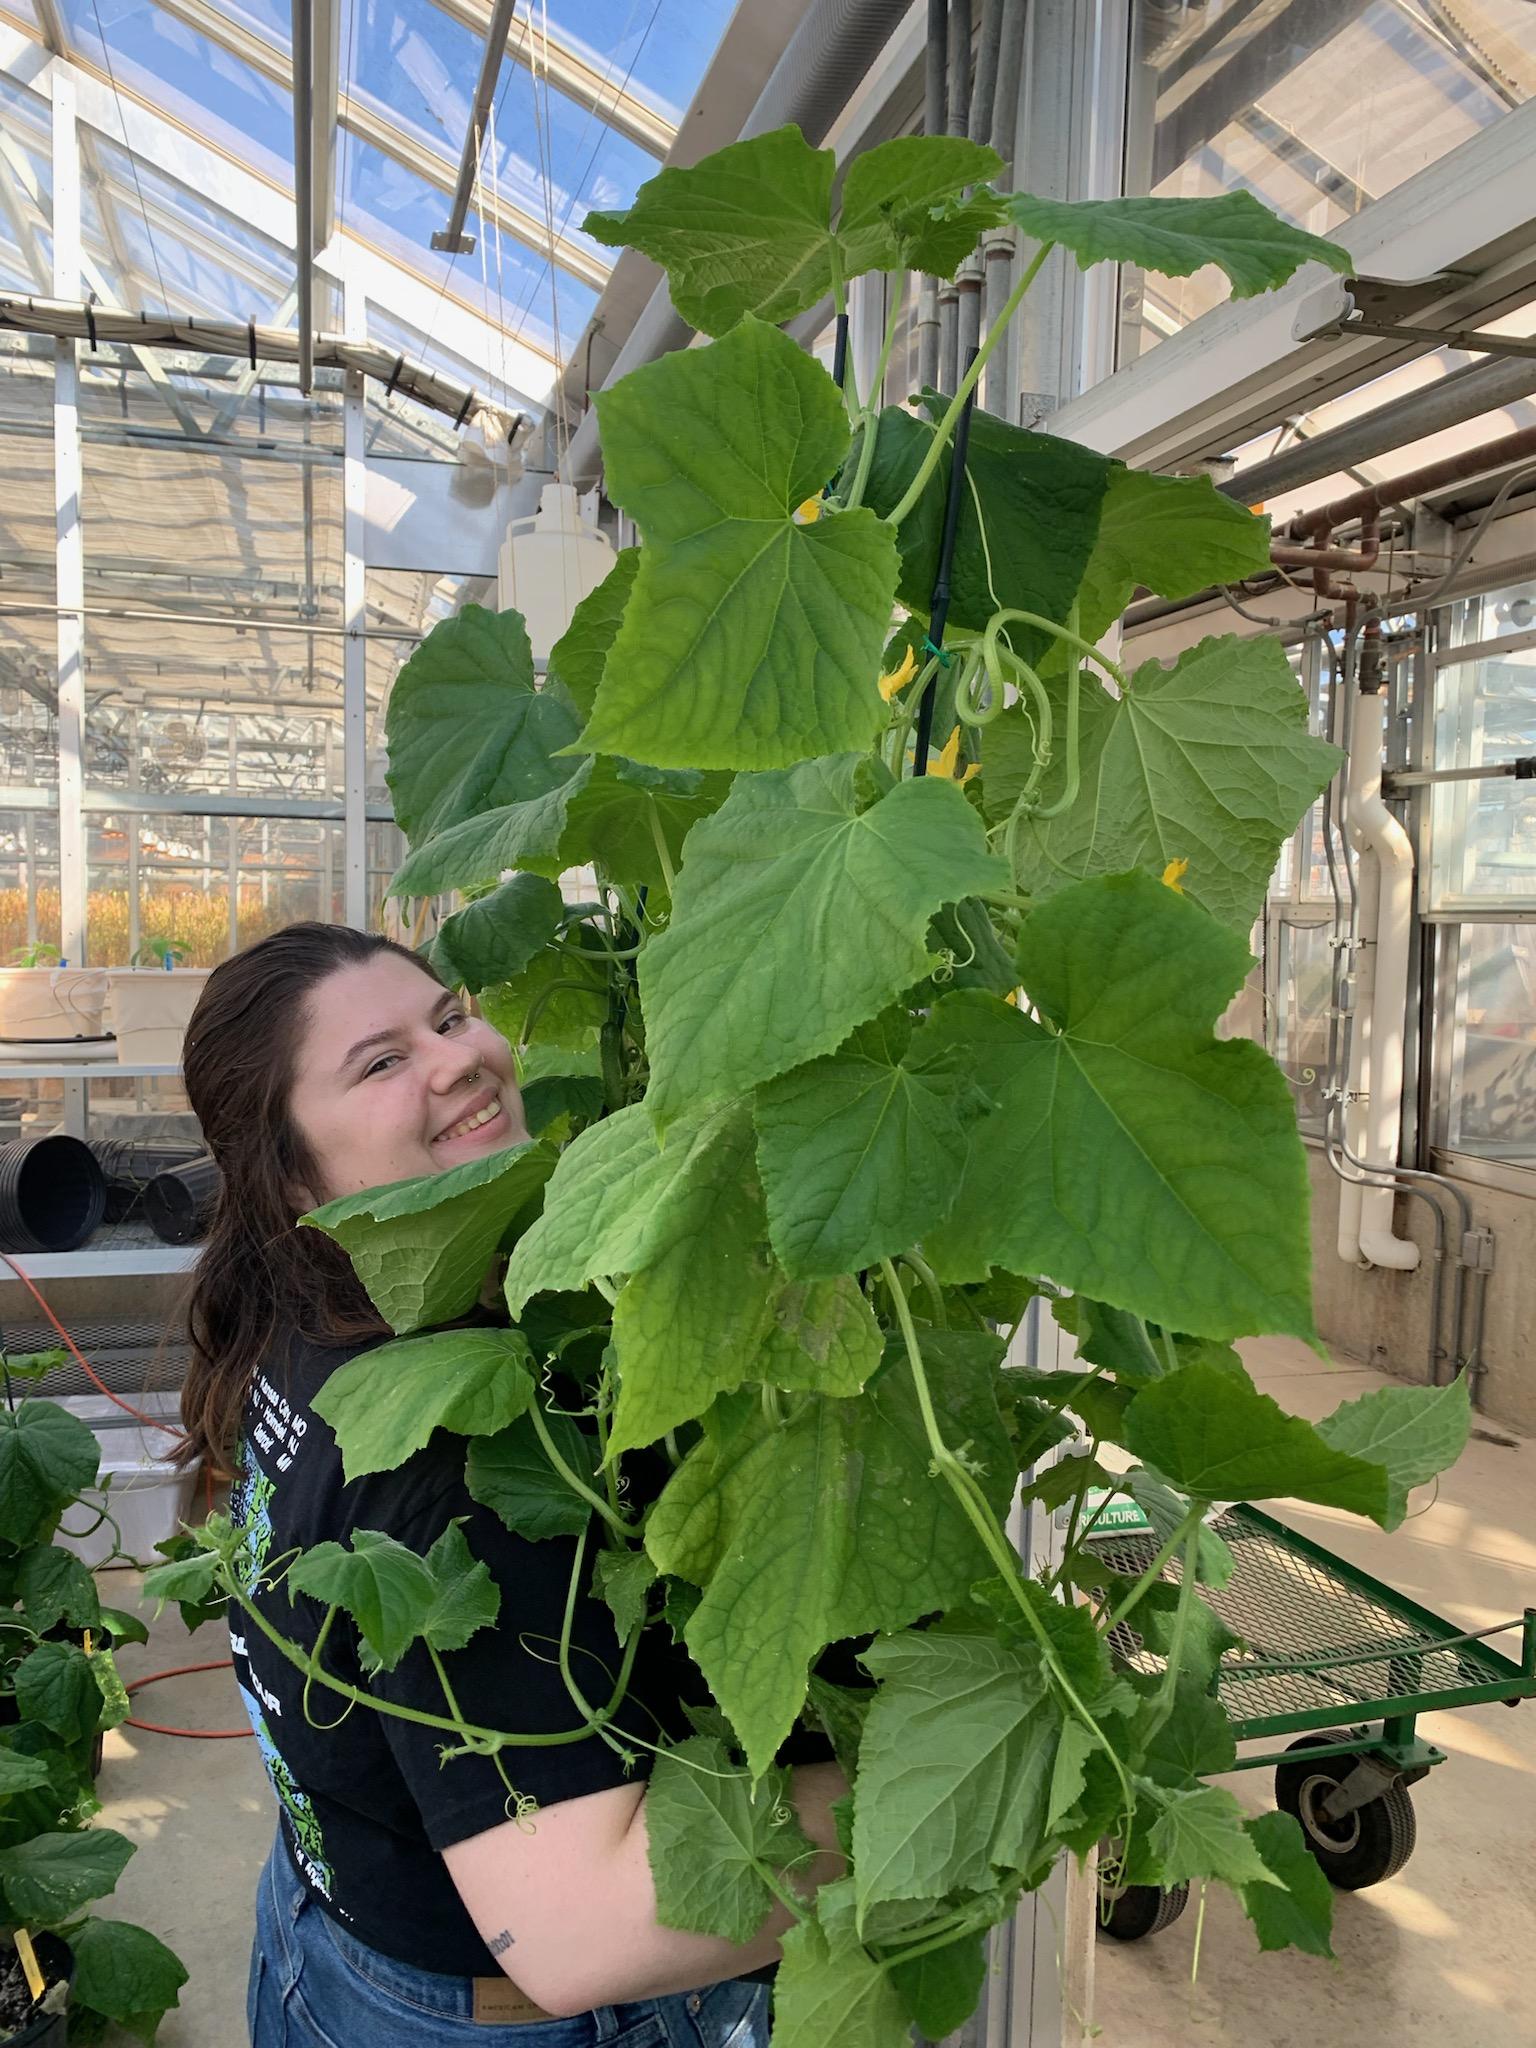 Sophie McCloskey.  A happy student surrounded by plants!